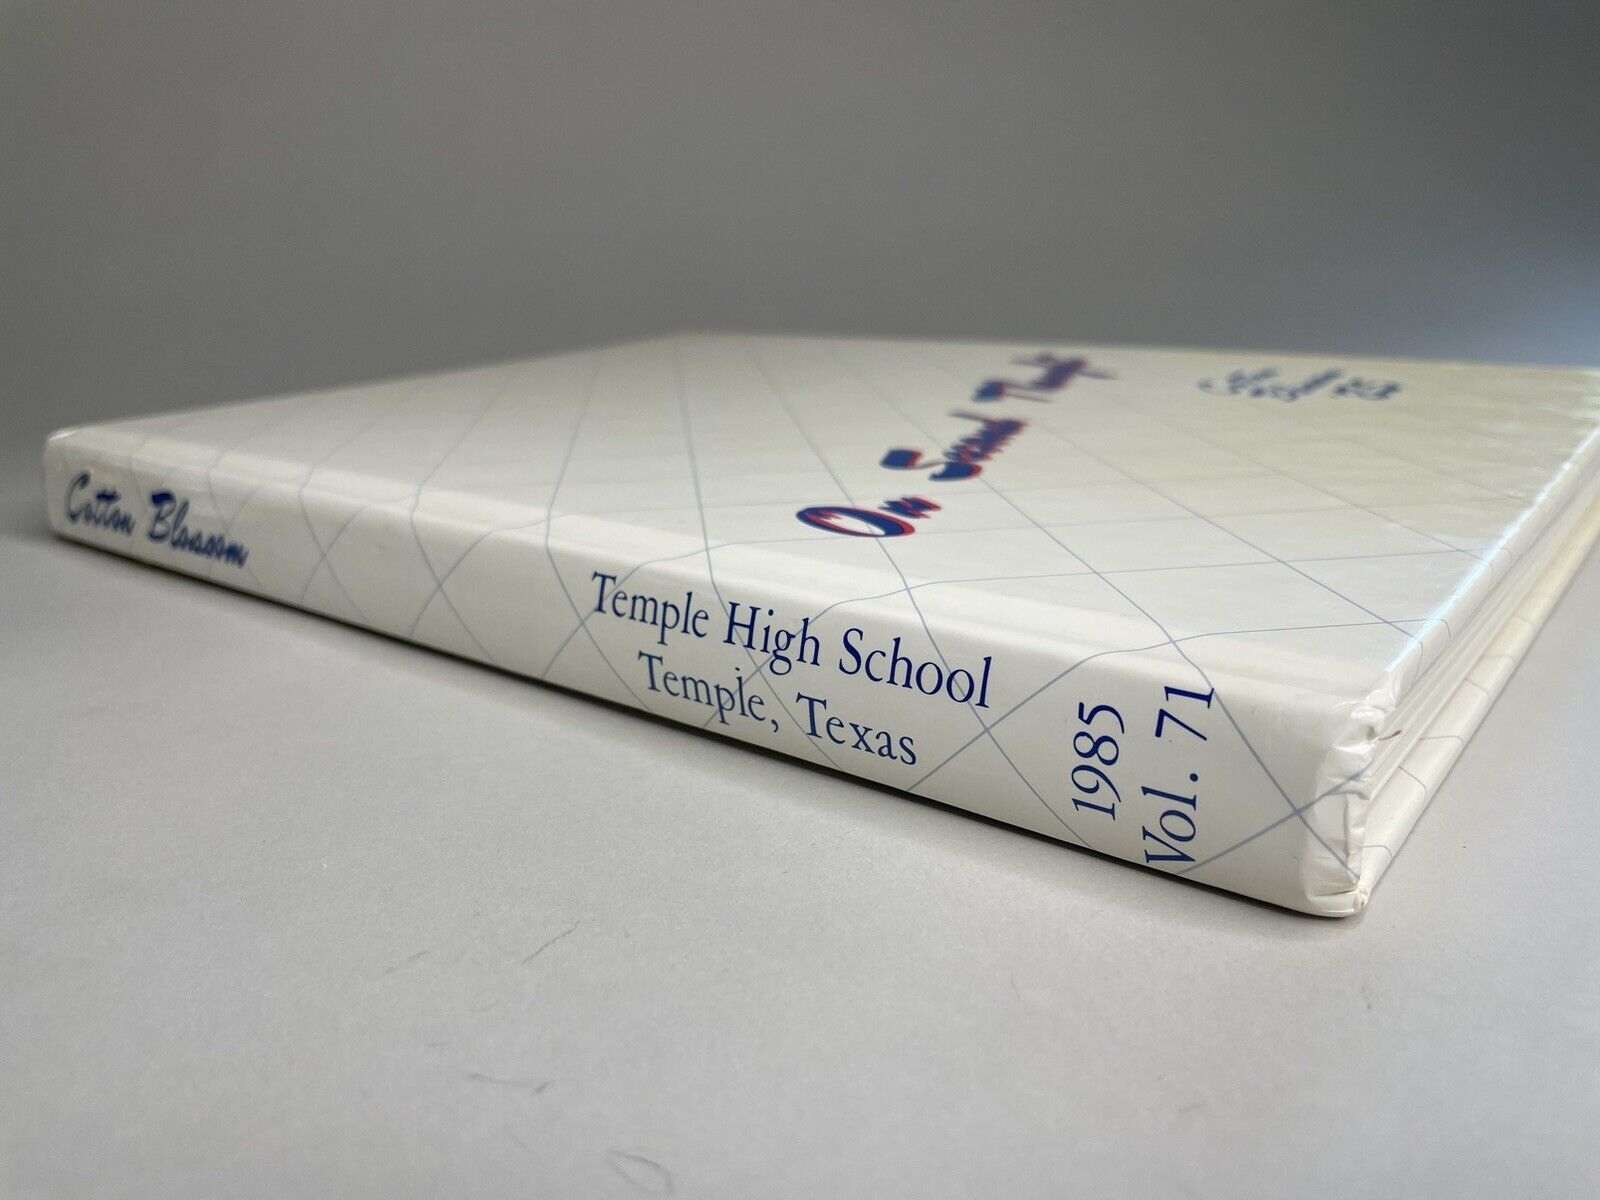 1985 TEMPLE HIGH SCHOOL YEARBOOK COTTON BLOSSOM - TEMPLE, TEXAS WILDCATS